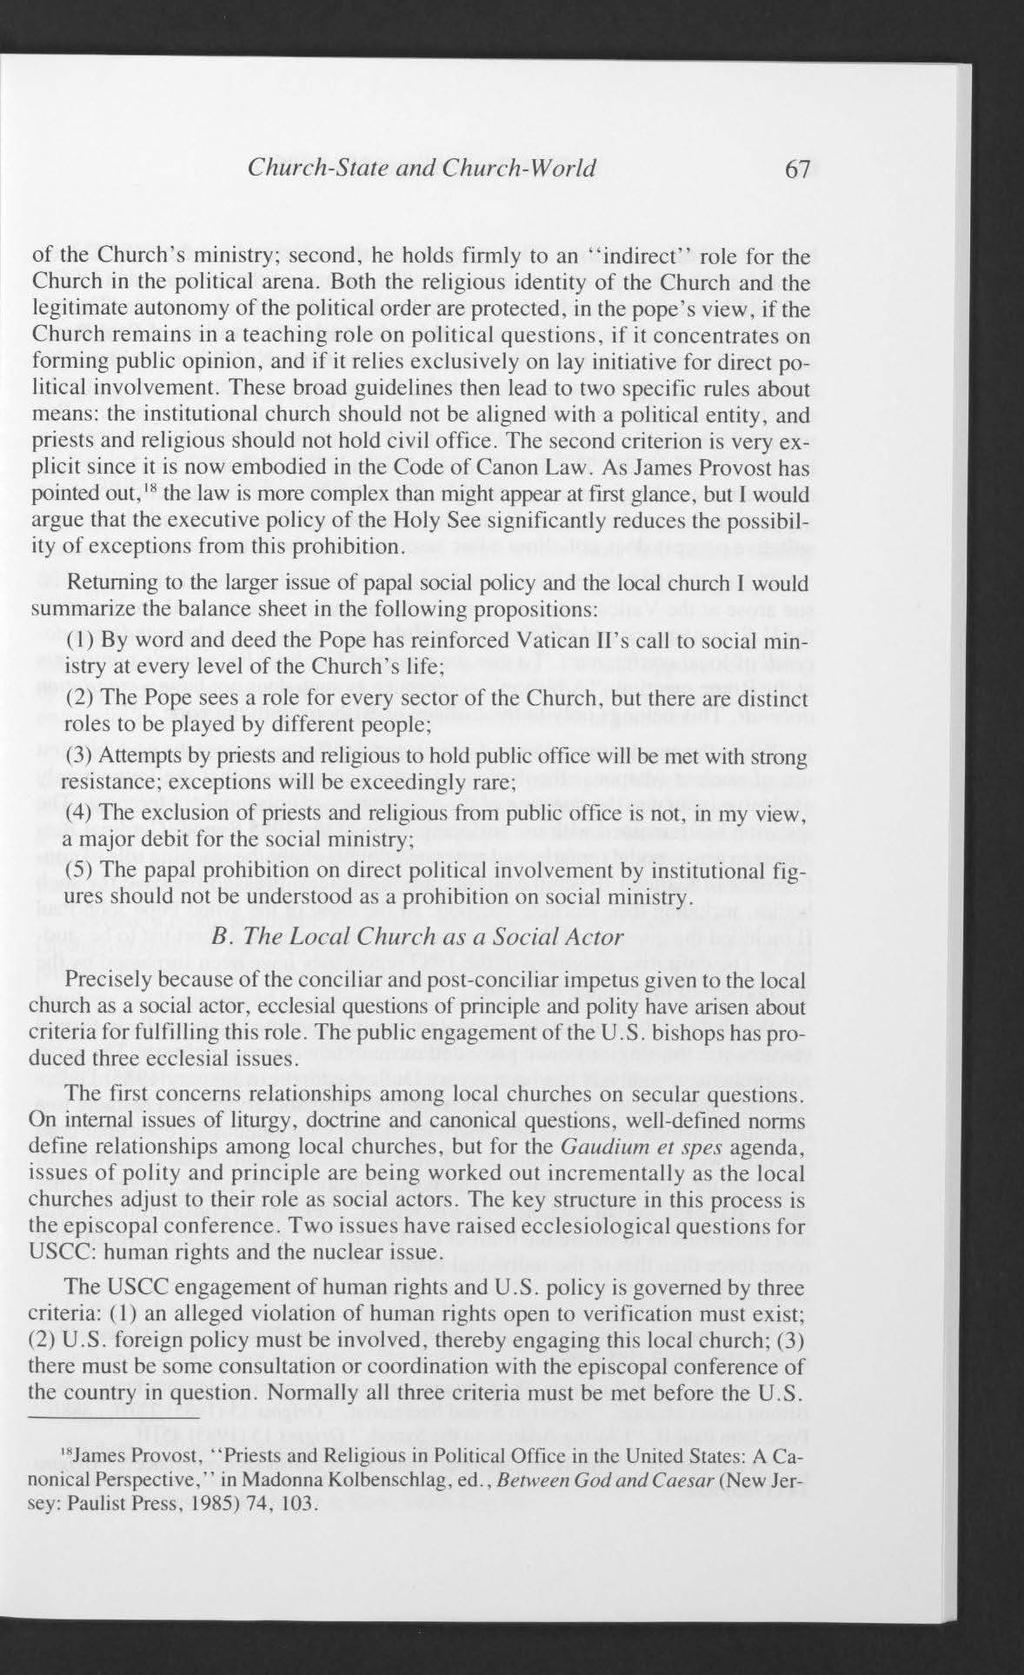 Church-State and Church-World 67 of the Church's ministry; second, he holds firmly to an "indirect" role for the Church in the political arena.